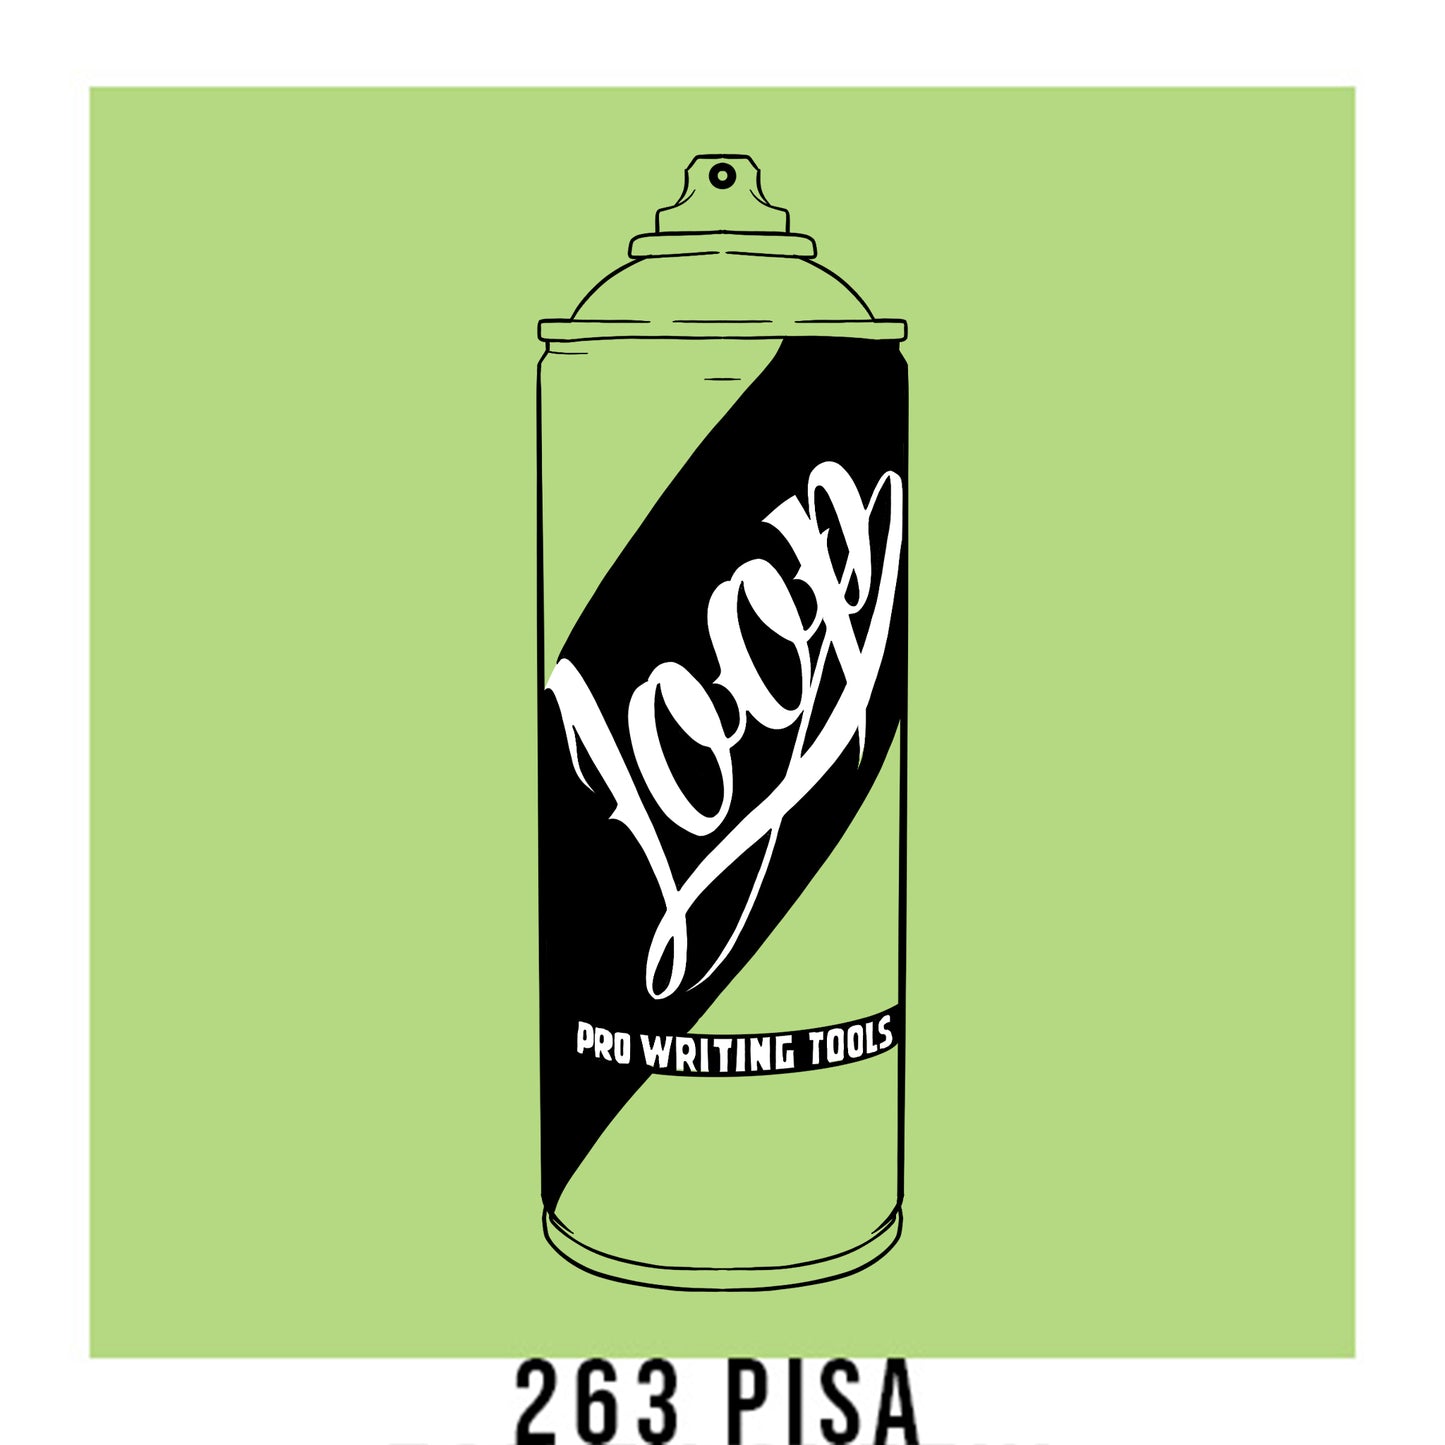 A black outline drawing of a pastel lime Green spray paint can with the word "Loop" written on the face in script. The background is a color swatch of the same pastel lime Green with a white border with the words "263 Pisa" at the bottom.